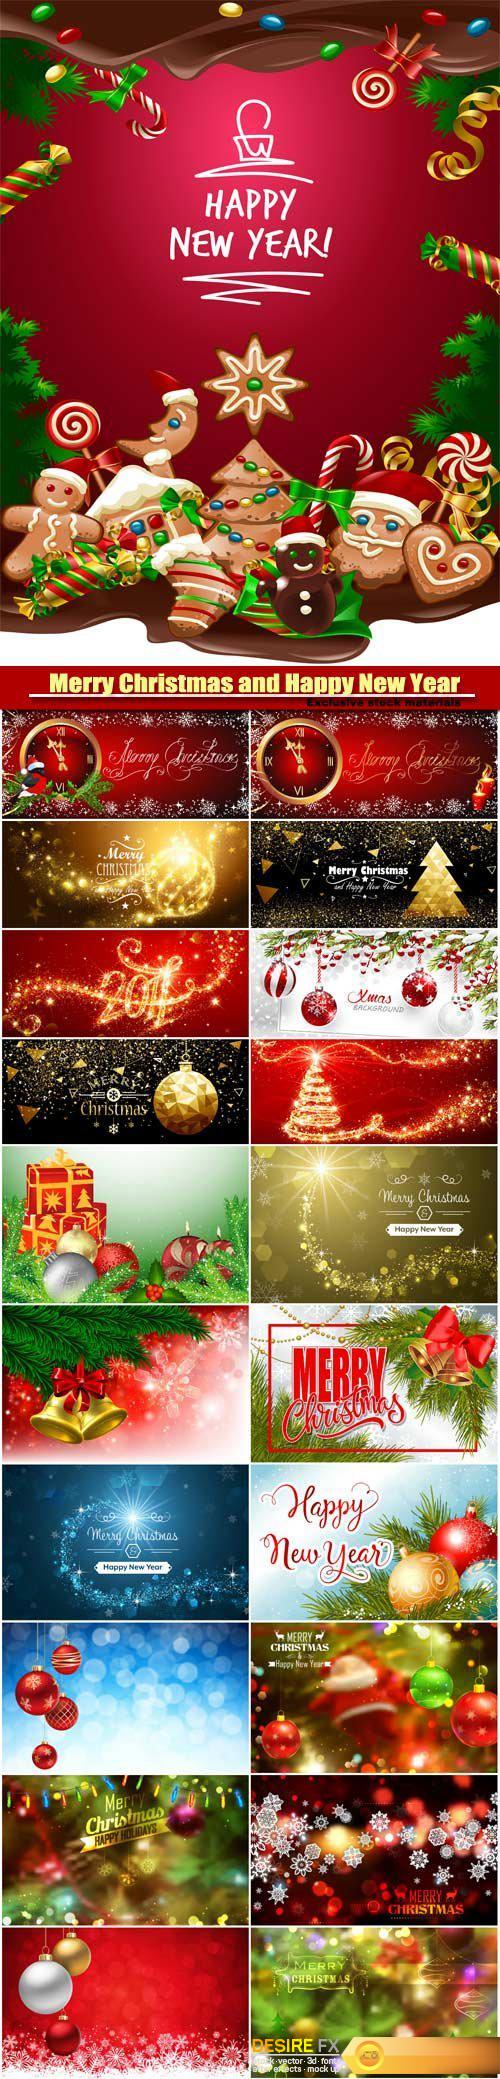 Merry Christmas and Happy New Year vector background